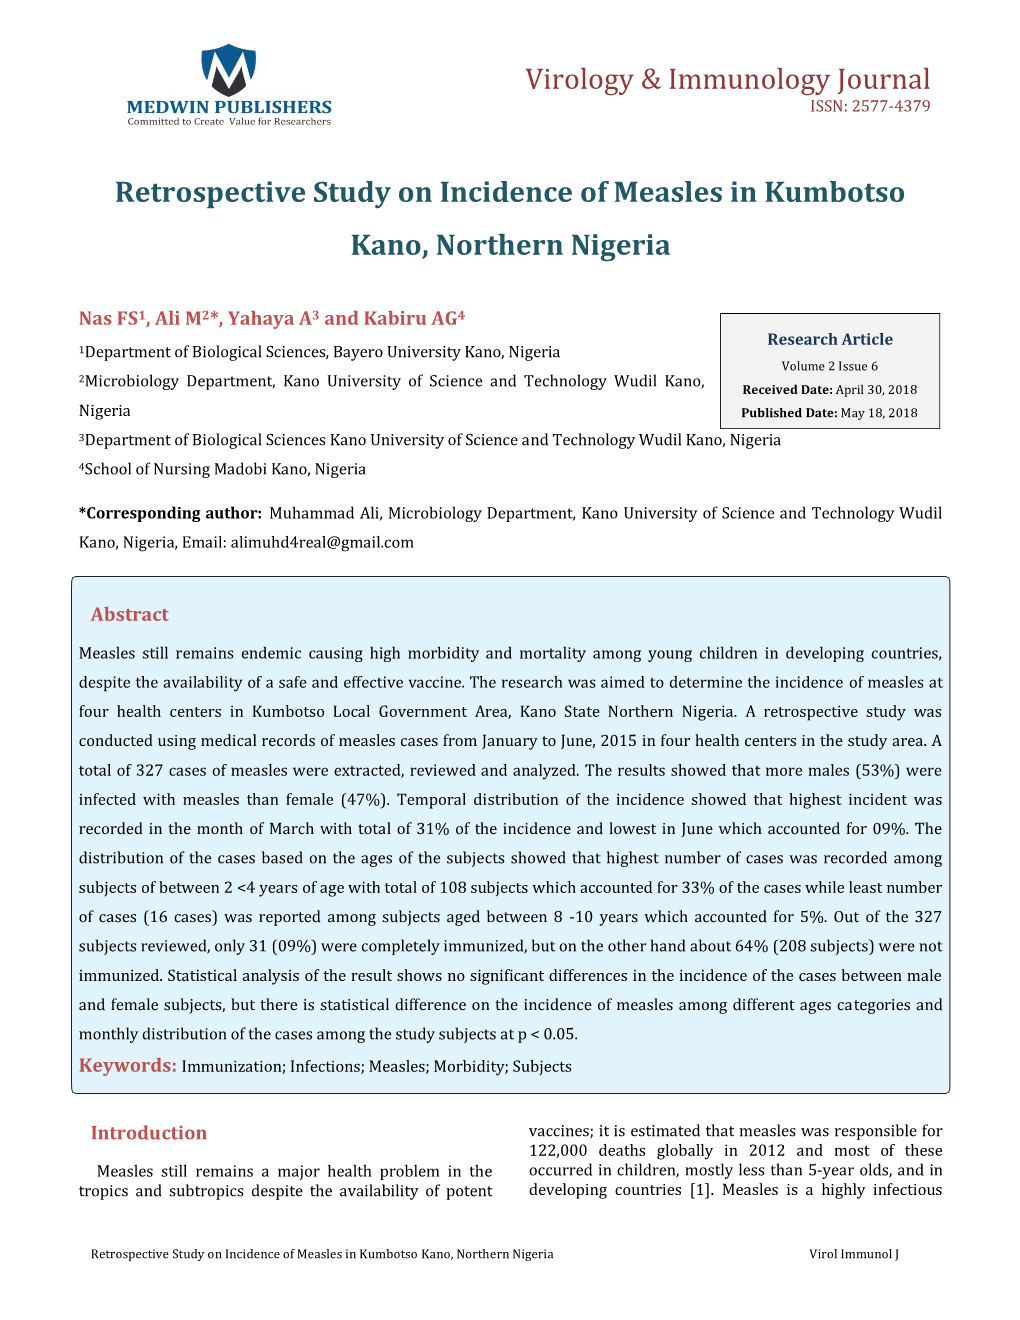 Retrospective Study on Incidence of Measles in Kumbotso Kano, Northern Nigeria